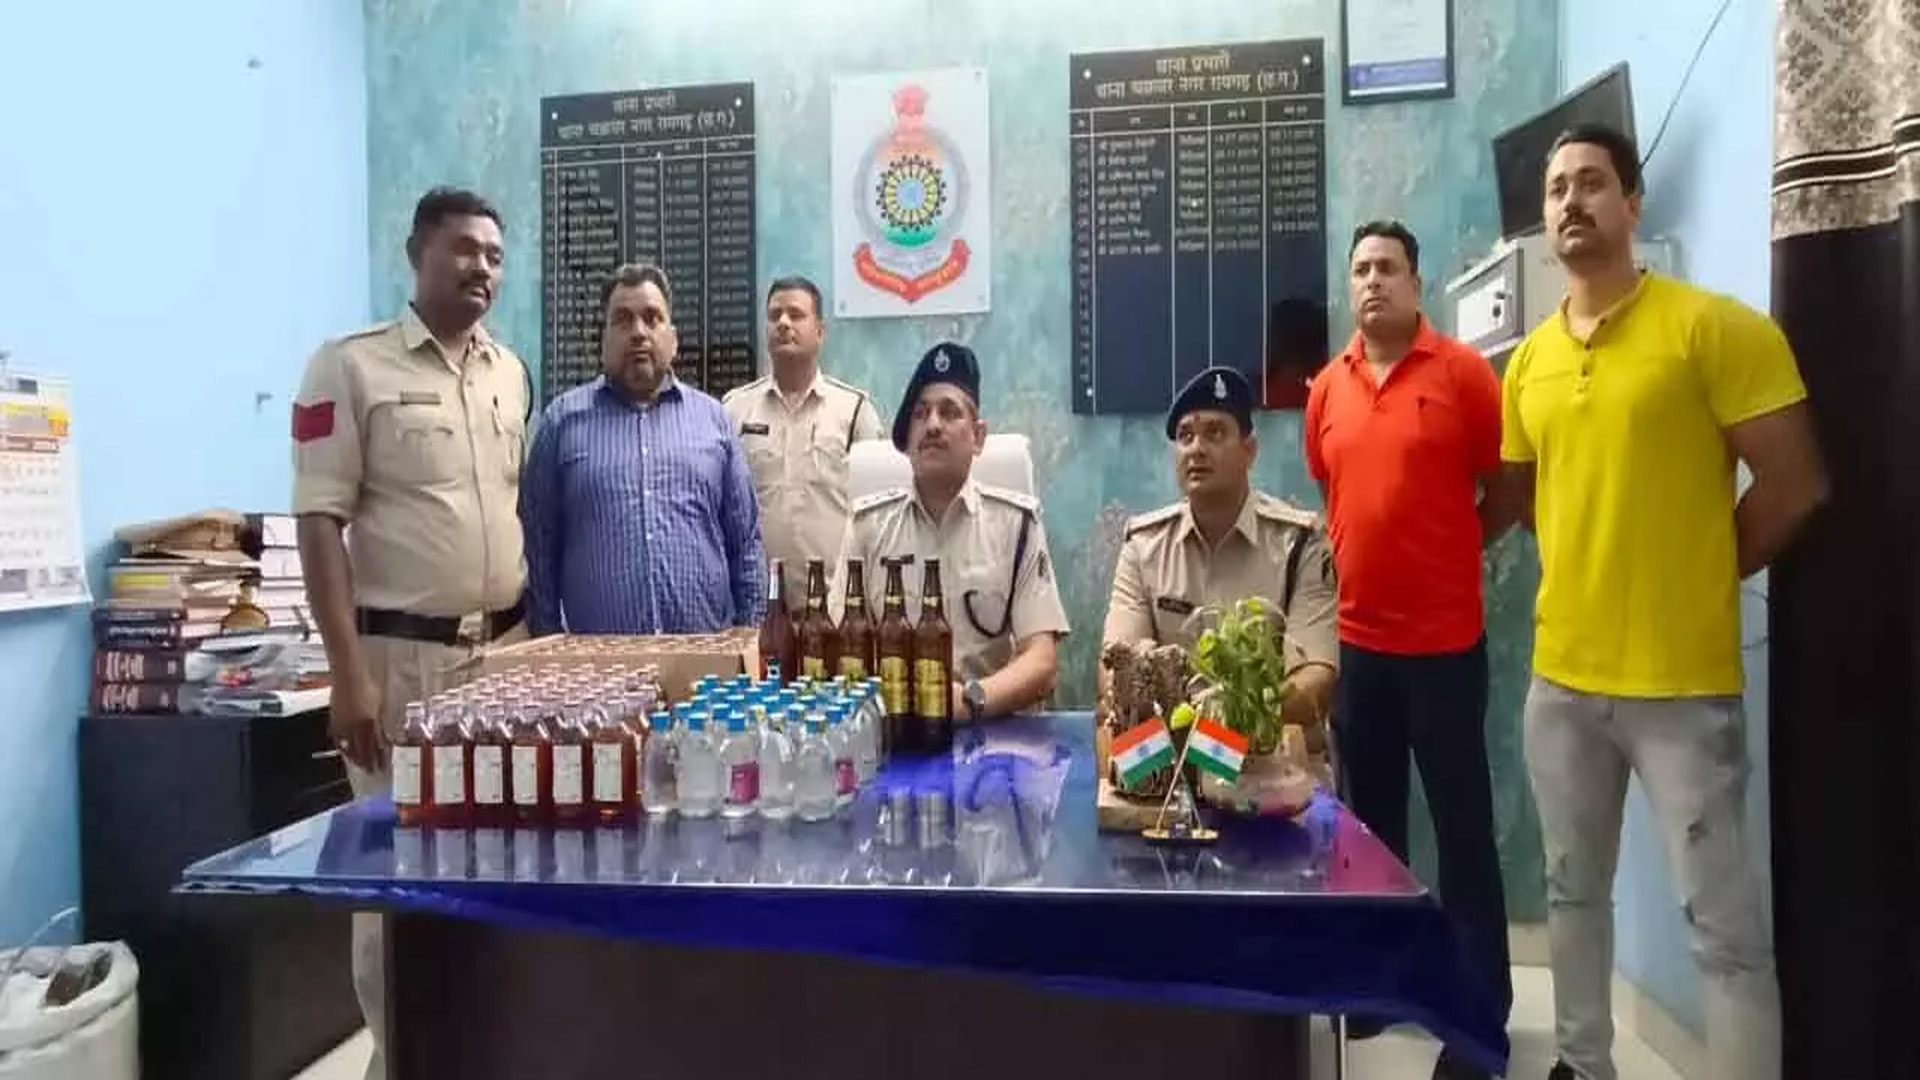 Police raid in dhaba adjacent to main road, liquor and beer seized